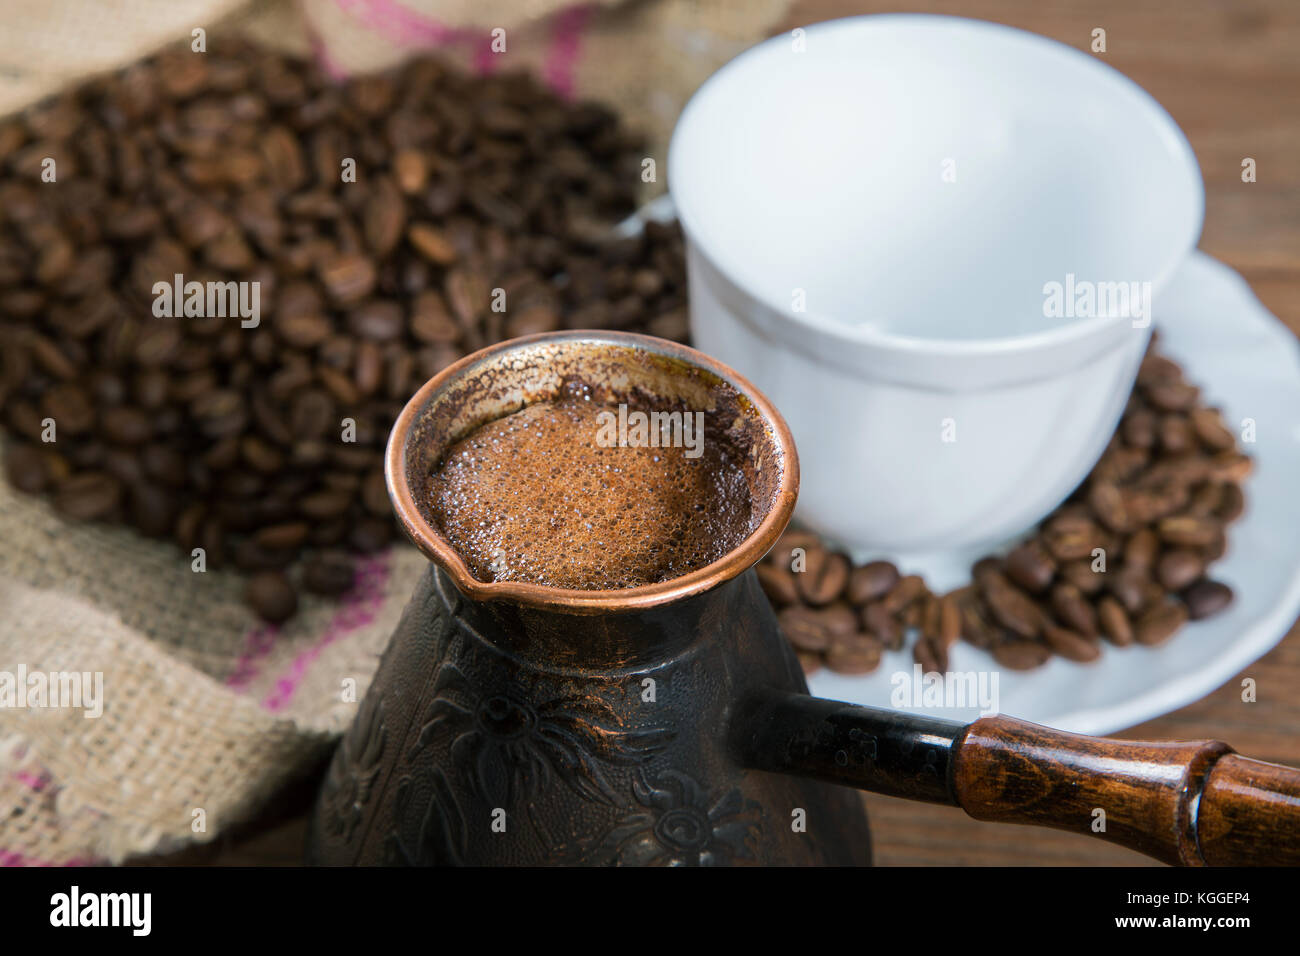 https://c8.alamy.com/comp/KGGEP4/turka-with-coffee-on-the-table-next-to-coffee-beans-KGGEP4.jpg